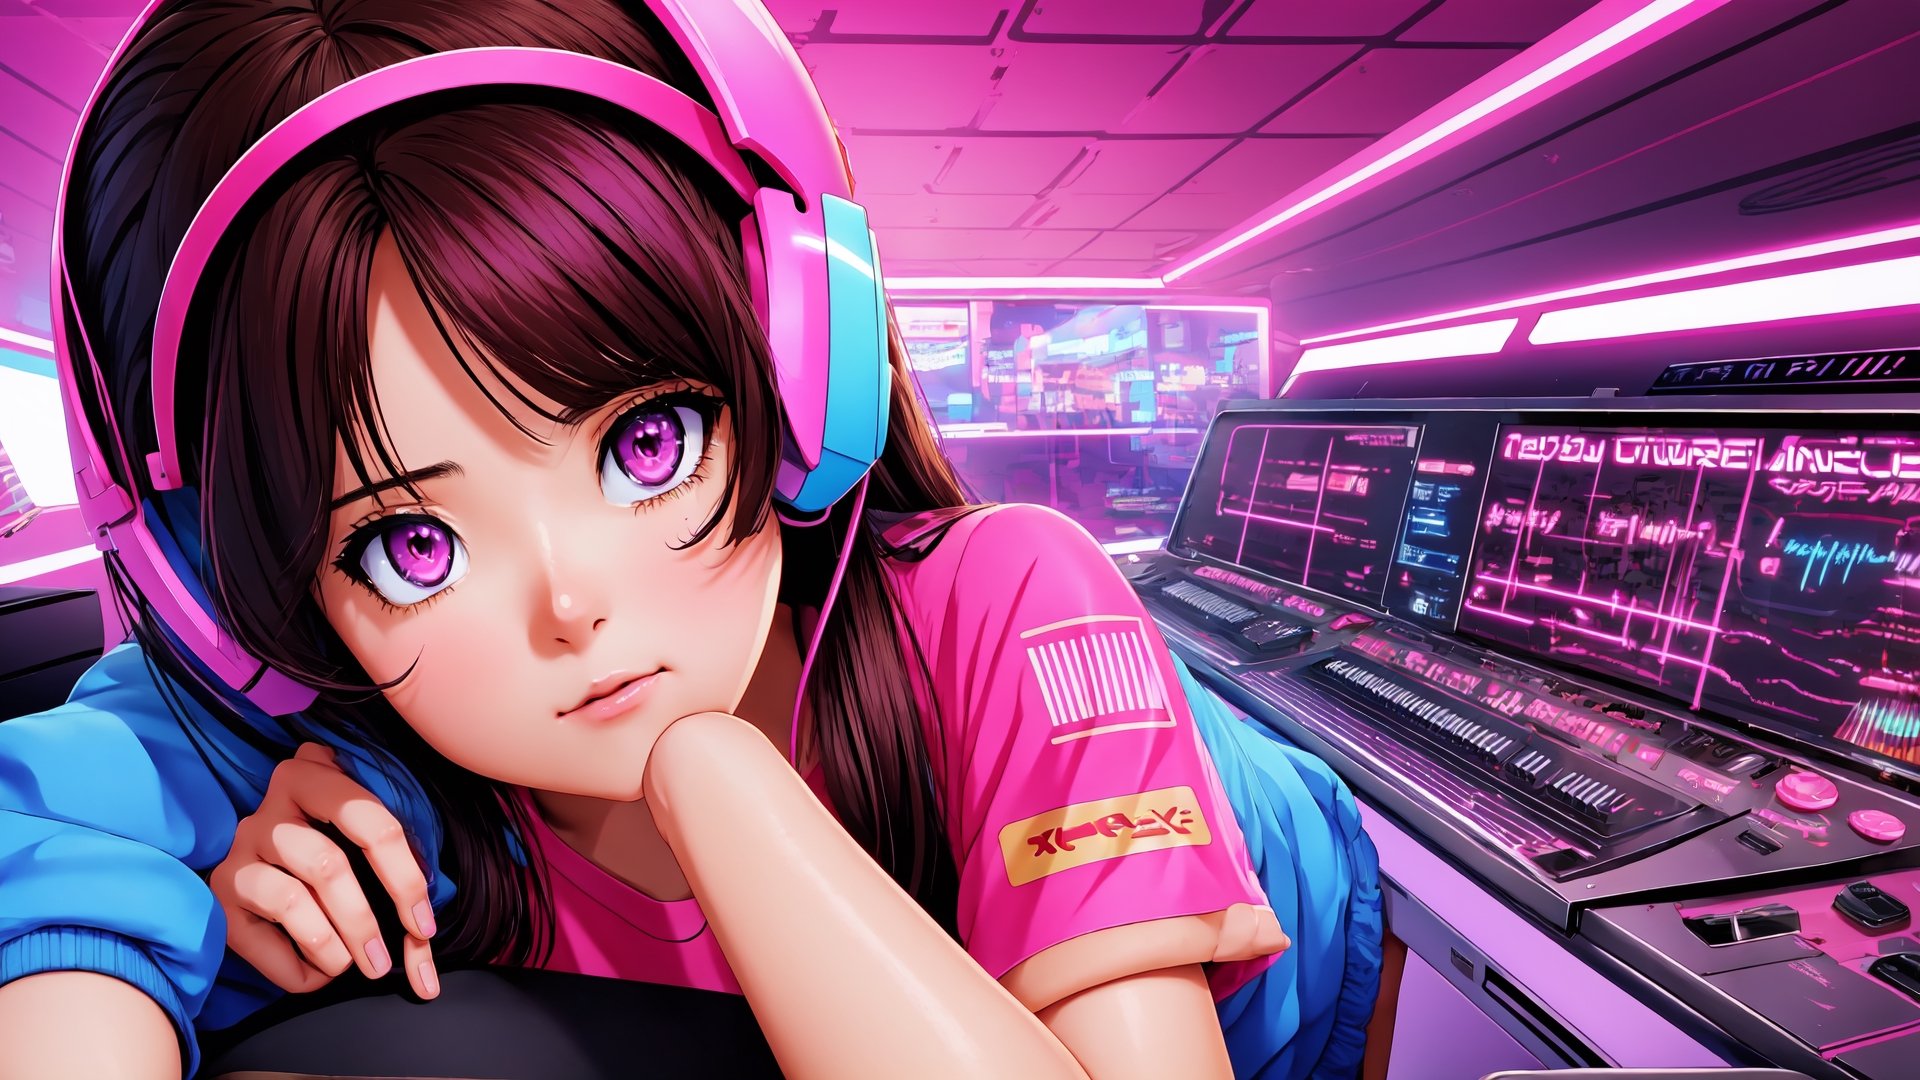 ((1girl, solo:1.3)), (synthwave atmosphere:1.55), anime girl sitting on chair at computer desk with headphones on, writing in diary and studying, wearing animal print t-shirt, pleated pants, socks, off-shoulder jacket, anime style 4 k, digital anime illustration, digital anime art, anime style. 8k, anime moe artstyle, anime art wallpaper 4 k, anime art wallpaper 4k, anime style illustration, smooth anime cg art, detailed digital anime art, anime art wallpaper 8 k, realistic anime 3 d style, 